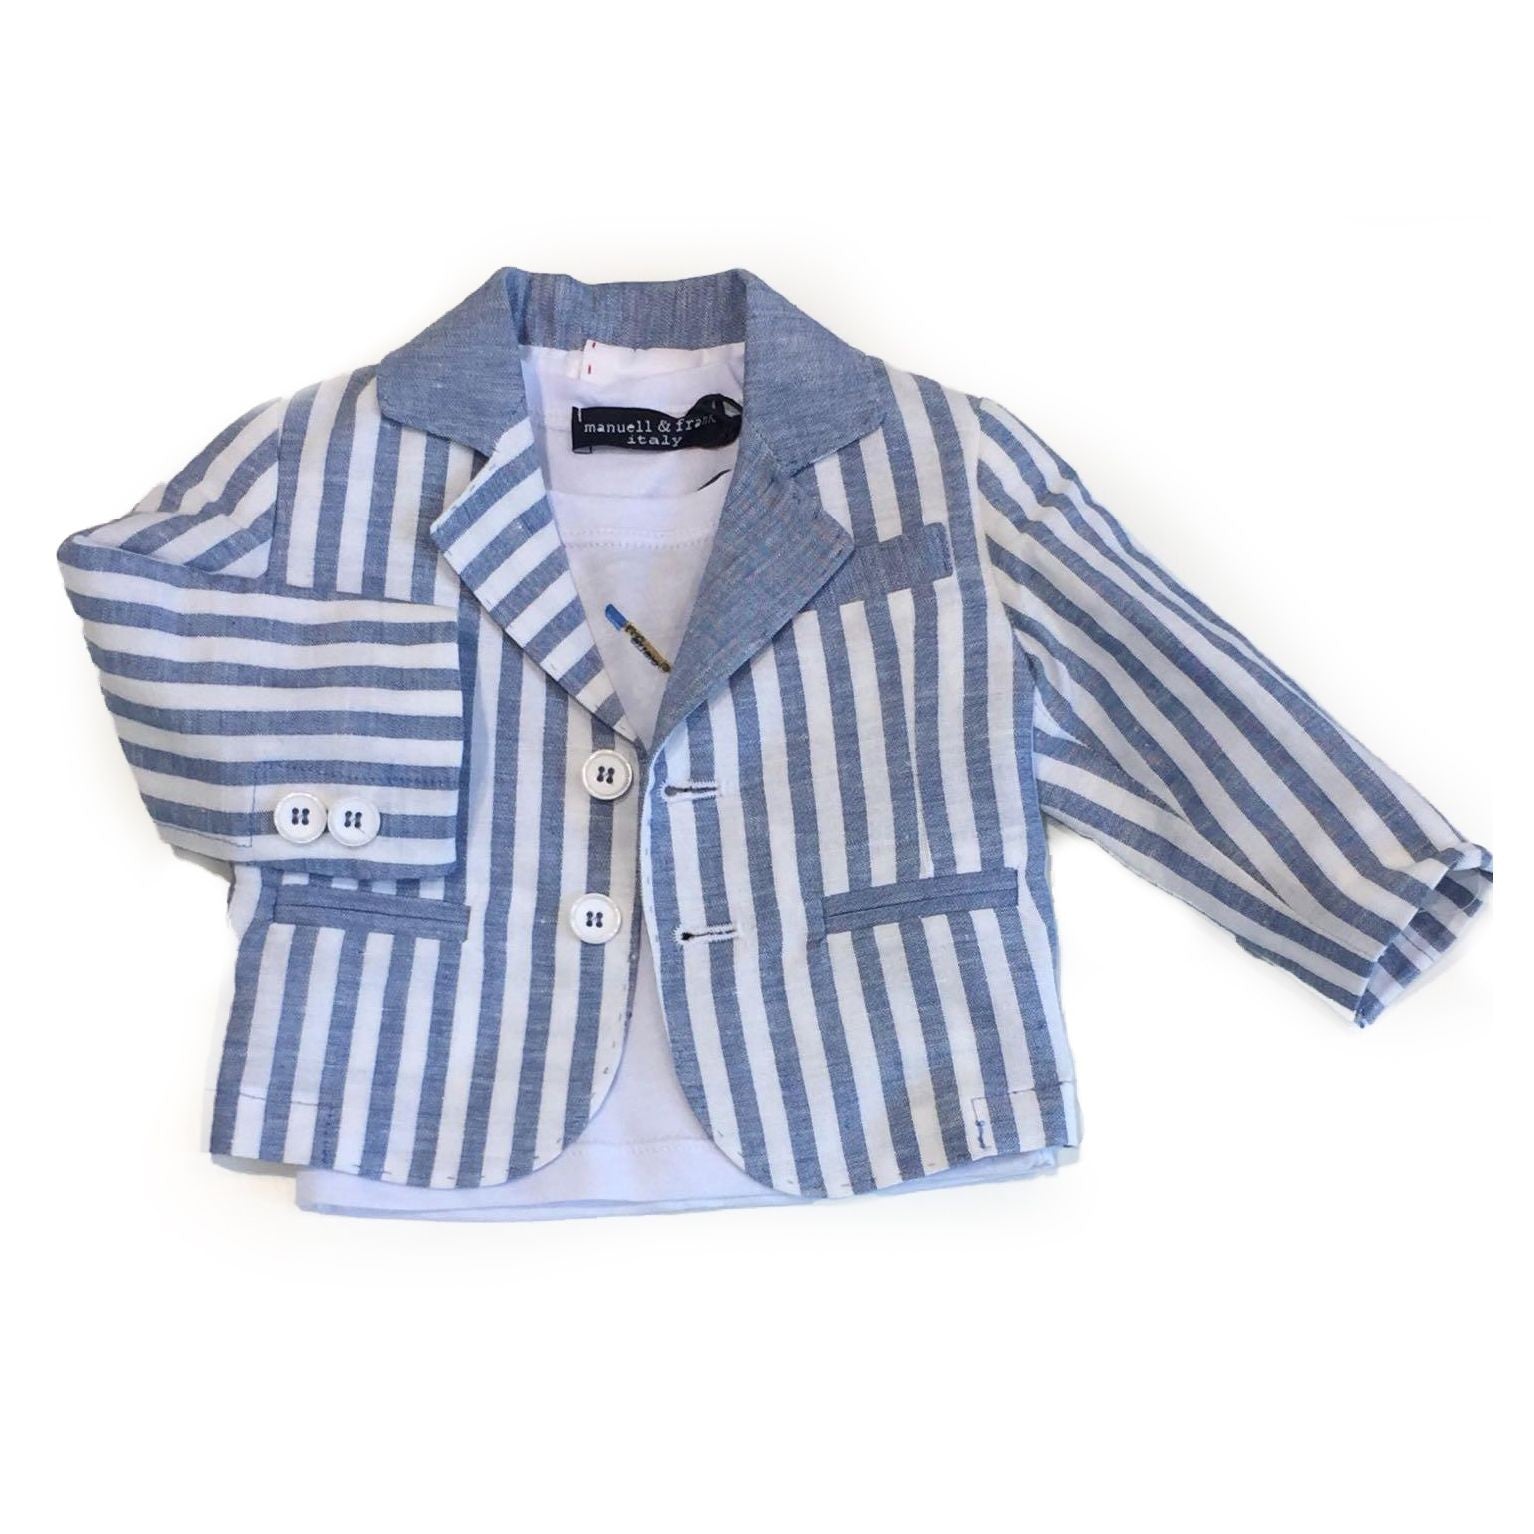 Giacca in Lino a righe Celeste-Bianco Neonato Manuell & Frank M3312 - MANUELL&FRANK - LuxuryKids